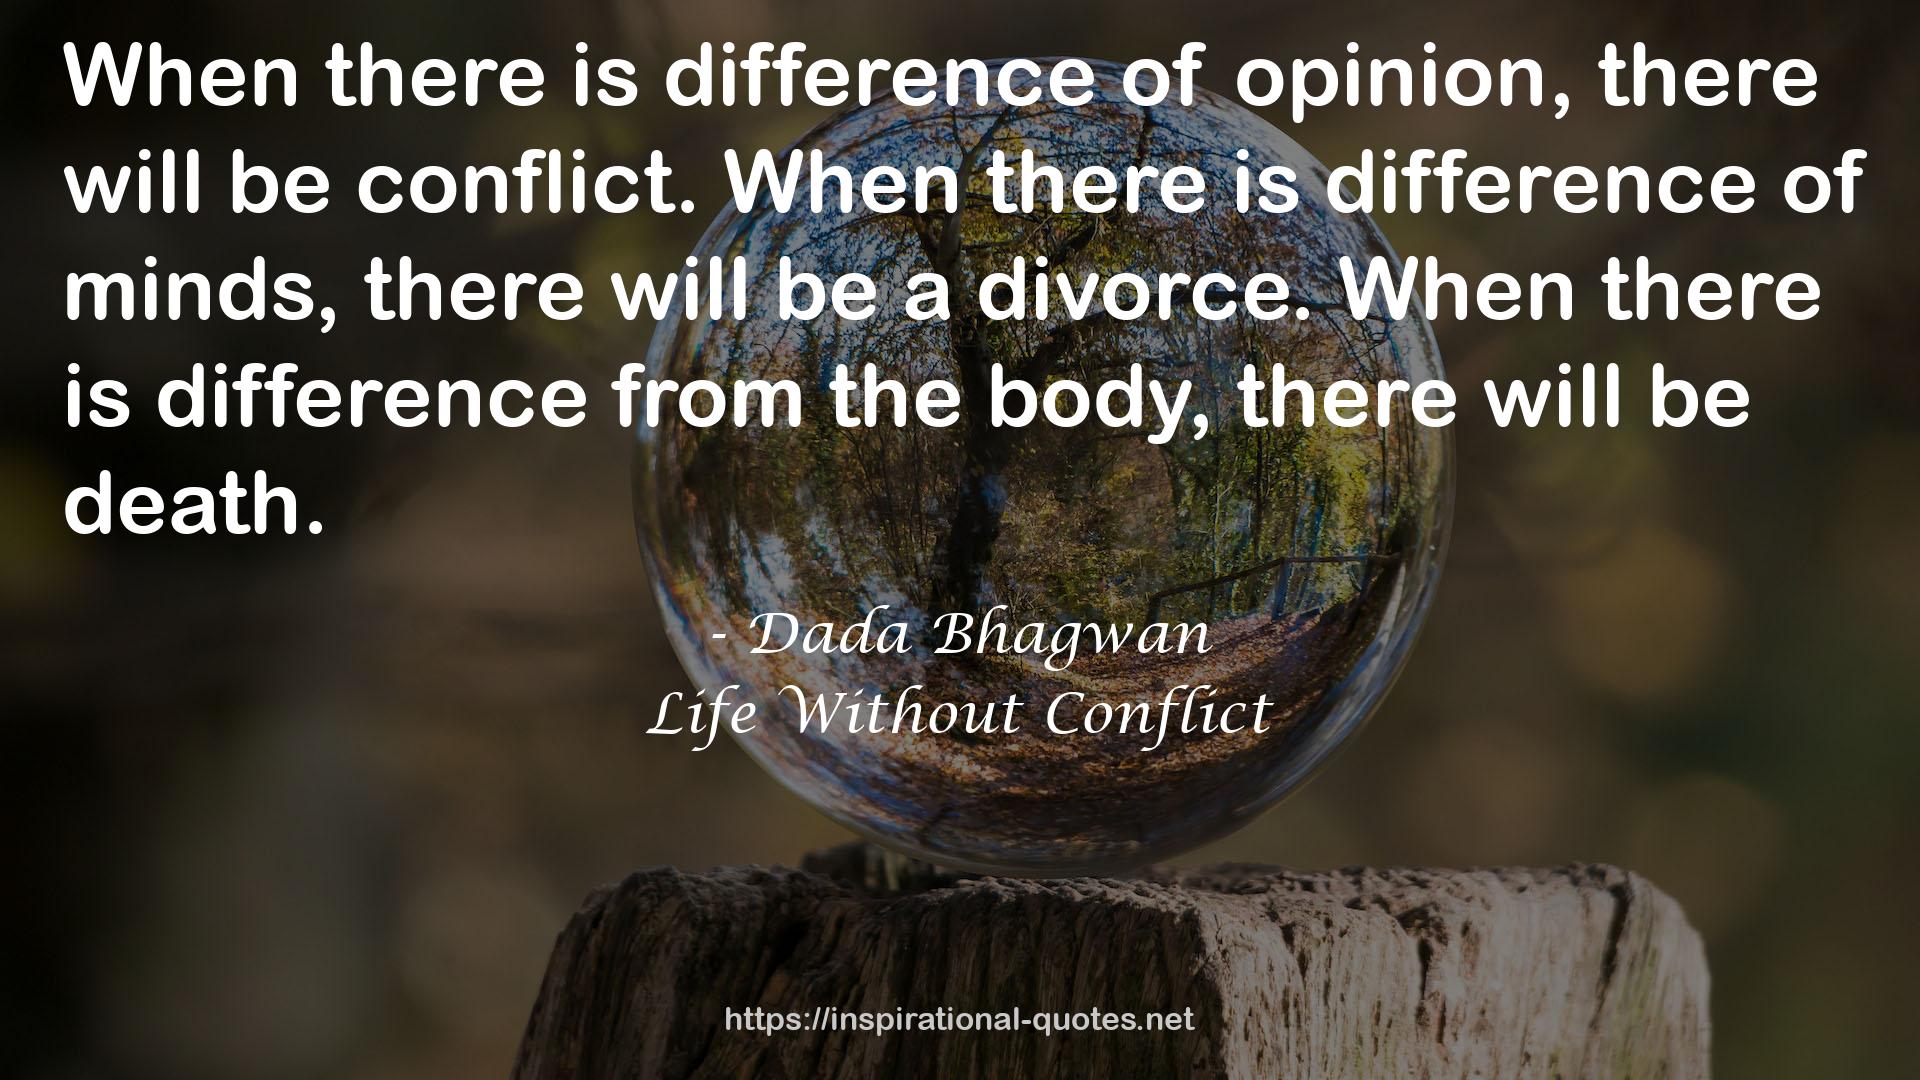 Life Without Conflict QUOTES